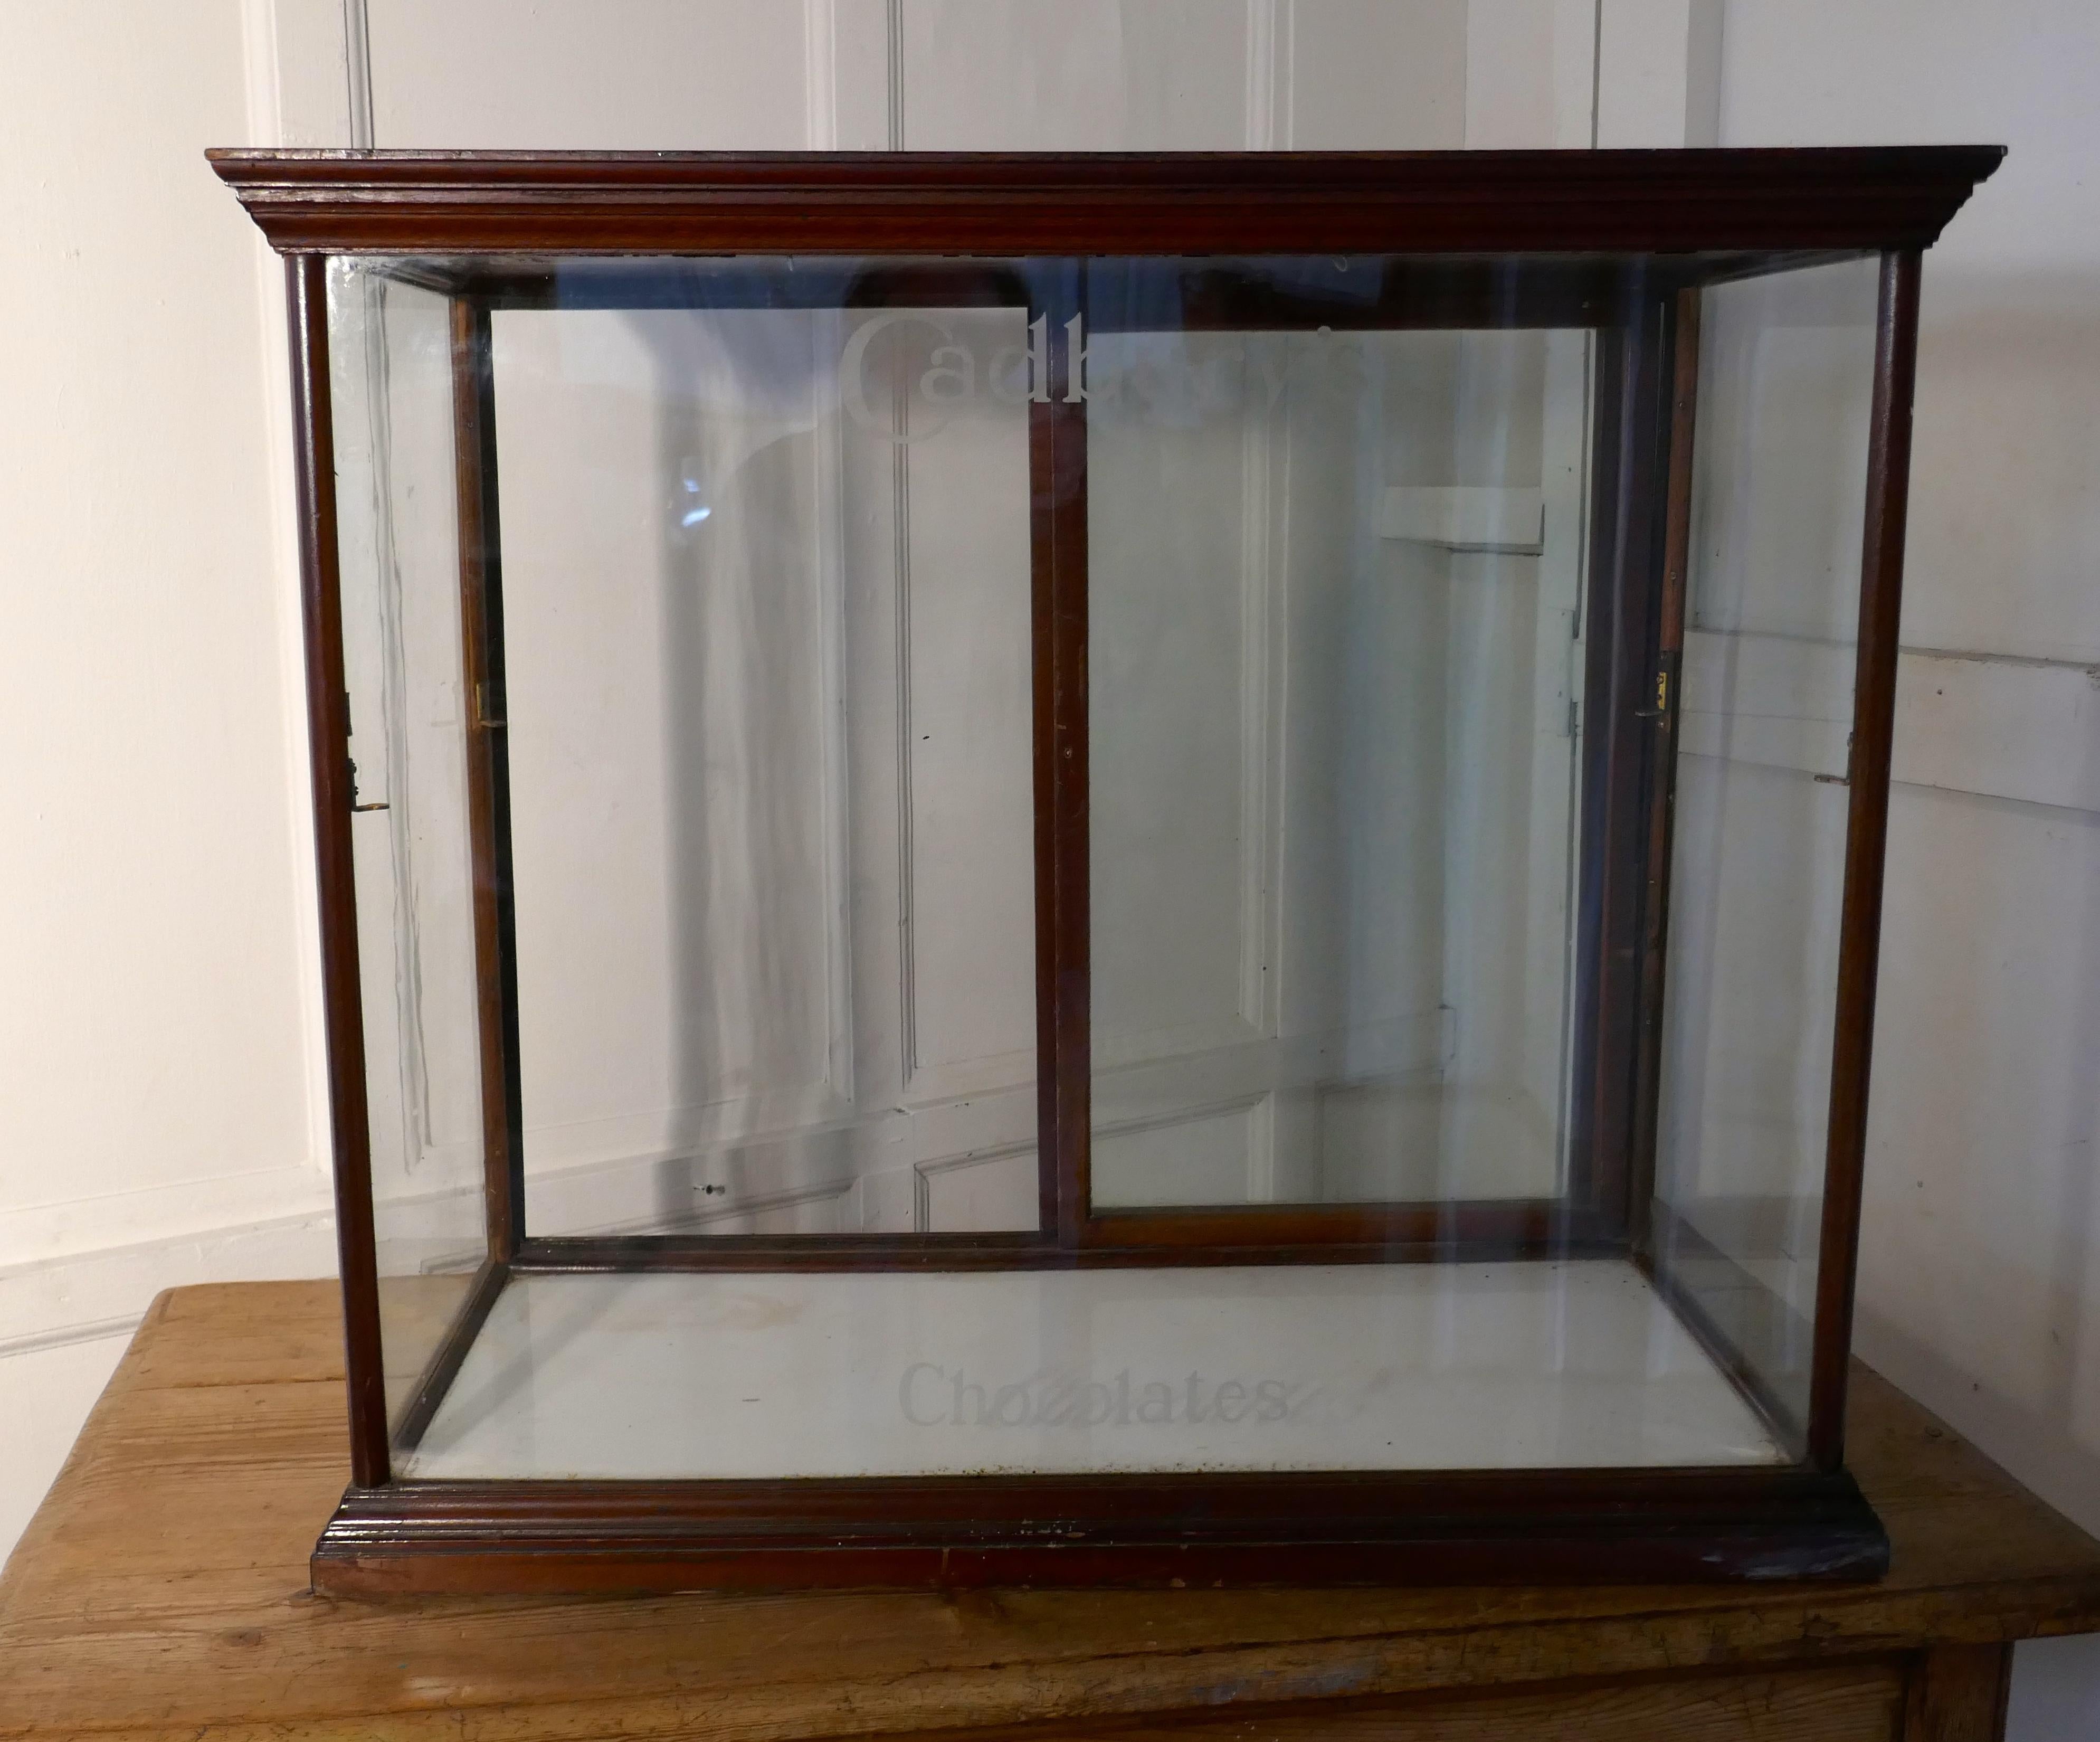 Edwardian Cadbury’s counter top sweet shop display cabinet

This glazed shop display cabinet is made mahogany, the glass has etched lettering on the front of the cabinets saying Cadbury’s at the top and Chocolates at the bottom 

The cabinet has